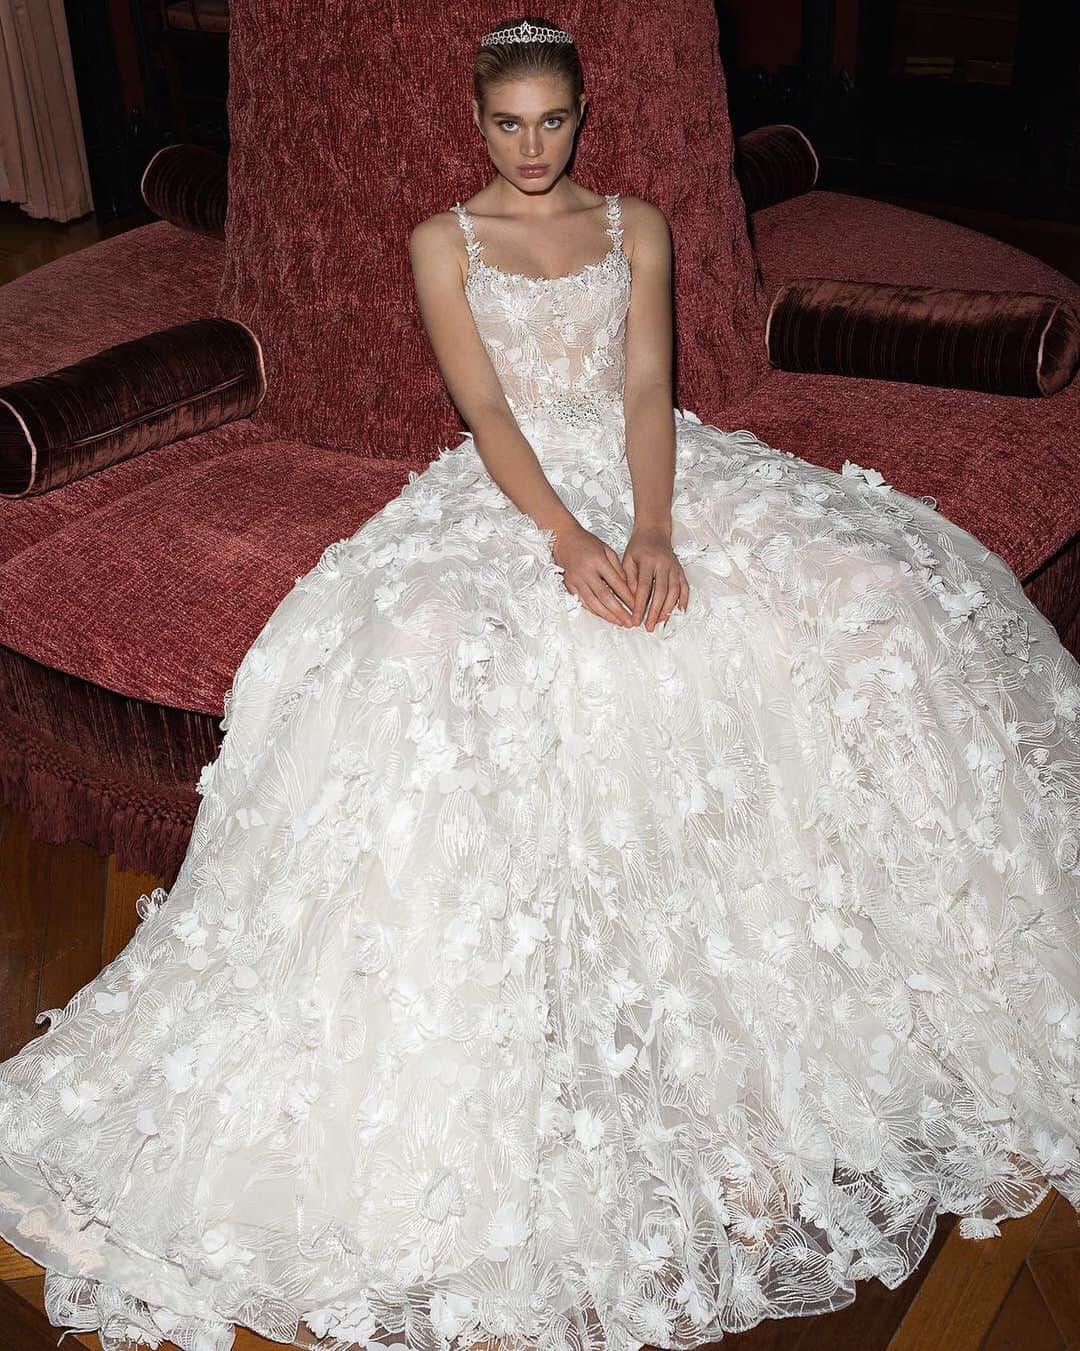 Magnolia Whiteさんのインスタグラム写真 - (Magnolia WhiteInstagram)「【About Galia Lahav Trunk Show﻿】﻿ ﻿﻿ We are excited to announce that the next @galialahav Trunk Show will be held May. 24-26 in MAGNOLIA WHITE omotesando and May. 17-19 in MAGNOLIA WHITE shinsaibashi. For each three days only, you will have a chance to peruse the latest collection from Galia Lahav, exclusively at MAGNOLIA WHITE.﻿﻿ ﻿﻿ The trunk show is by appointment only, on a first come first served basis.﻿ To make an appointment please email us with the following information:﻿ Name﻿﻿ Wedding Date﻿﻿ Wedding Venue﻿﻿ Cell Phone Number﻿ Preferred date :﻿ Tokyo / May. 24th / 25th / 26th﻿﻿ Osaka / May. 17th / 18th / 19th﻿﻿ Size : JP 5 (US 0) / JP 7 (US 2) / JP 9 (US 4) / JP11 (US 6) *If you are not sure about your size above, please give us by S, M, L sizes﻿﻿ ﻿﻿ mail.﻿ MAGNOLIA WHITE omotesando（info@magnolia-white.com）﻿ MAGNOLIA WHITE shinsaibashi（thedrape@magnolia-white.com）﻿ ﻿ Magnolia White is greatly looking forward to meeting you and helping you find your dream gown!」5月13日 11時29分 - magnoliawhite_official